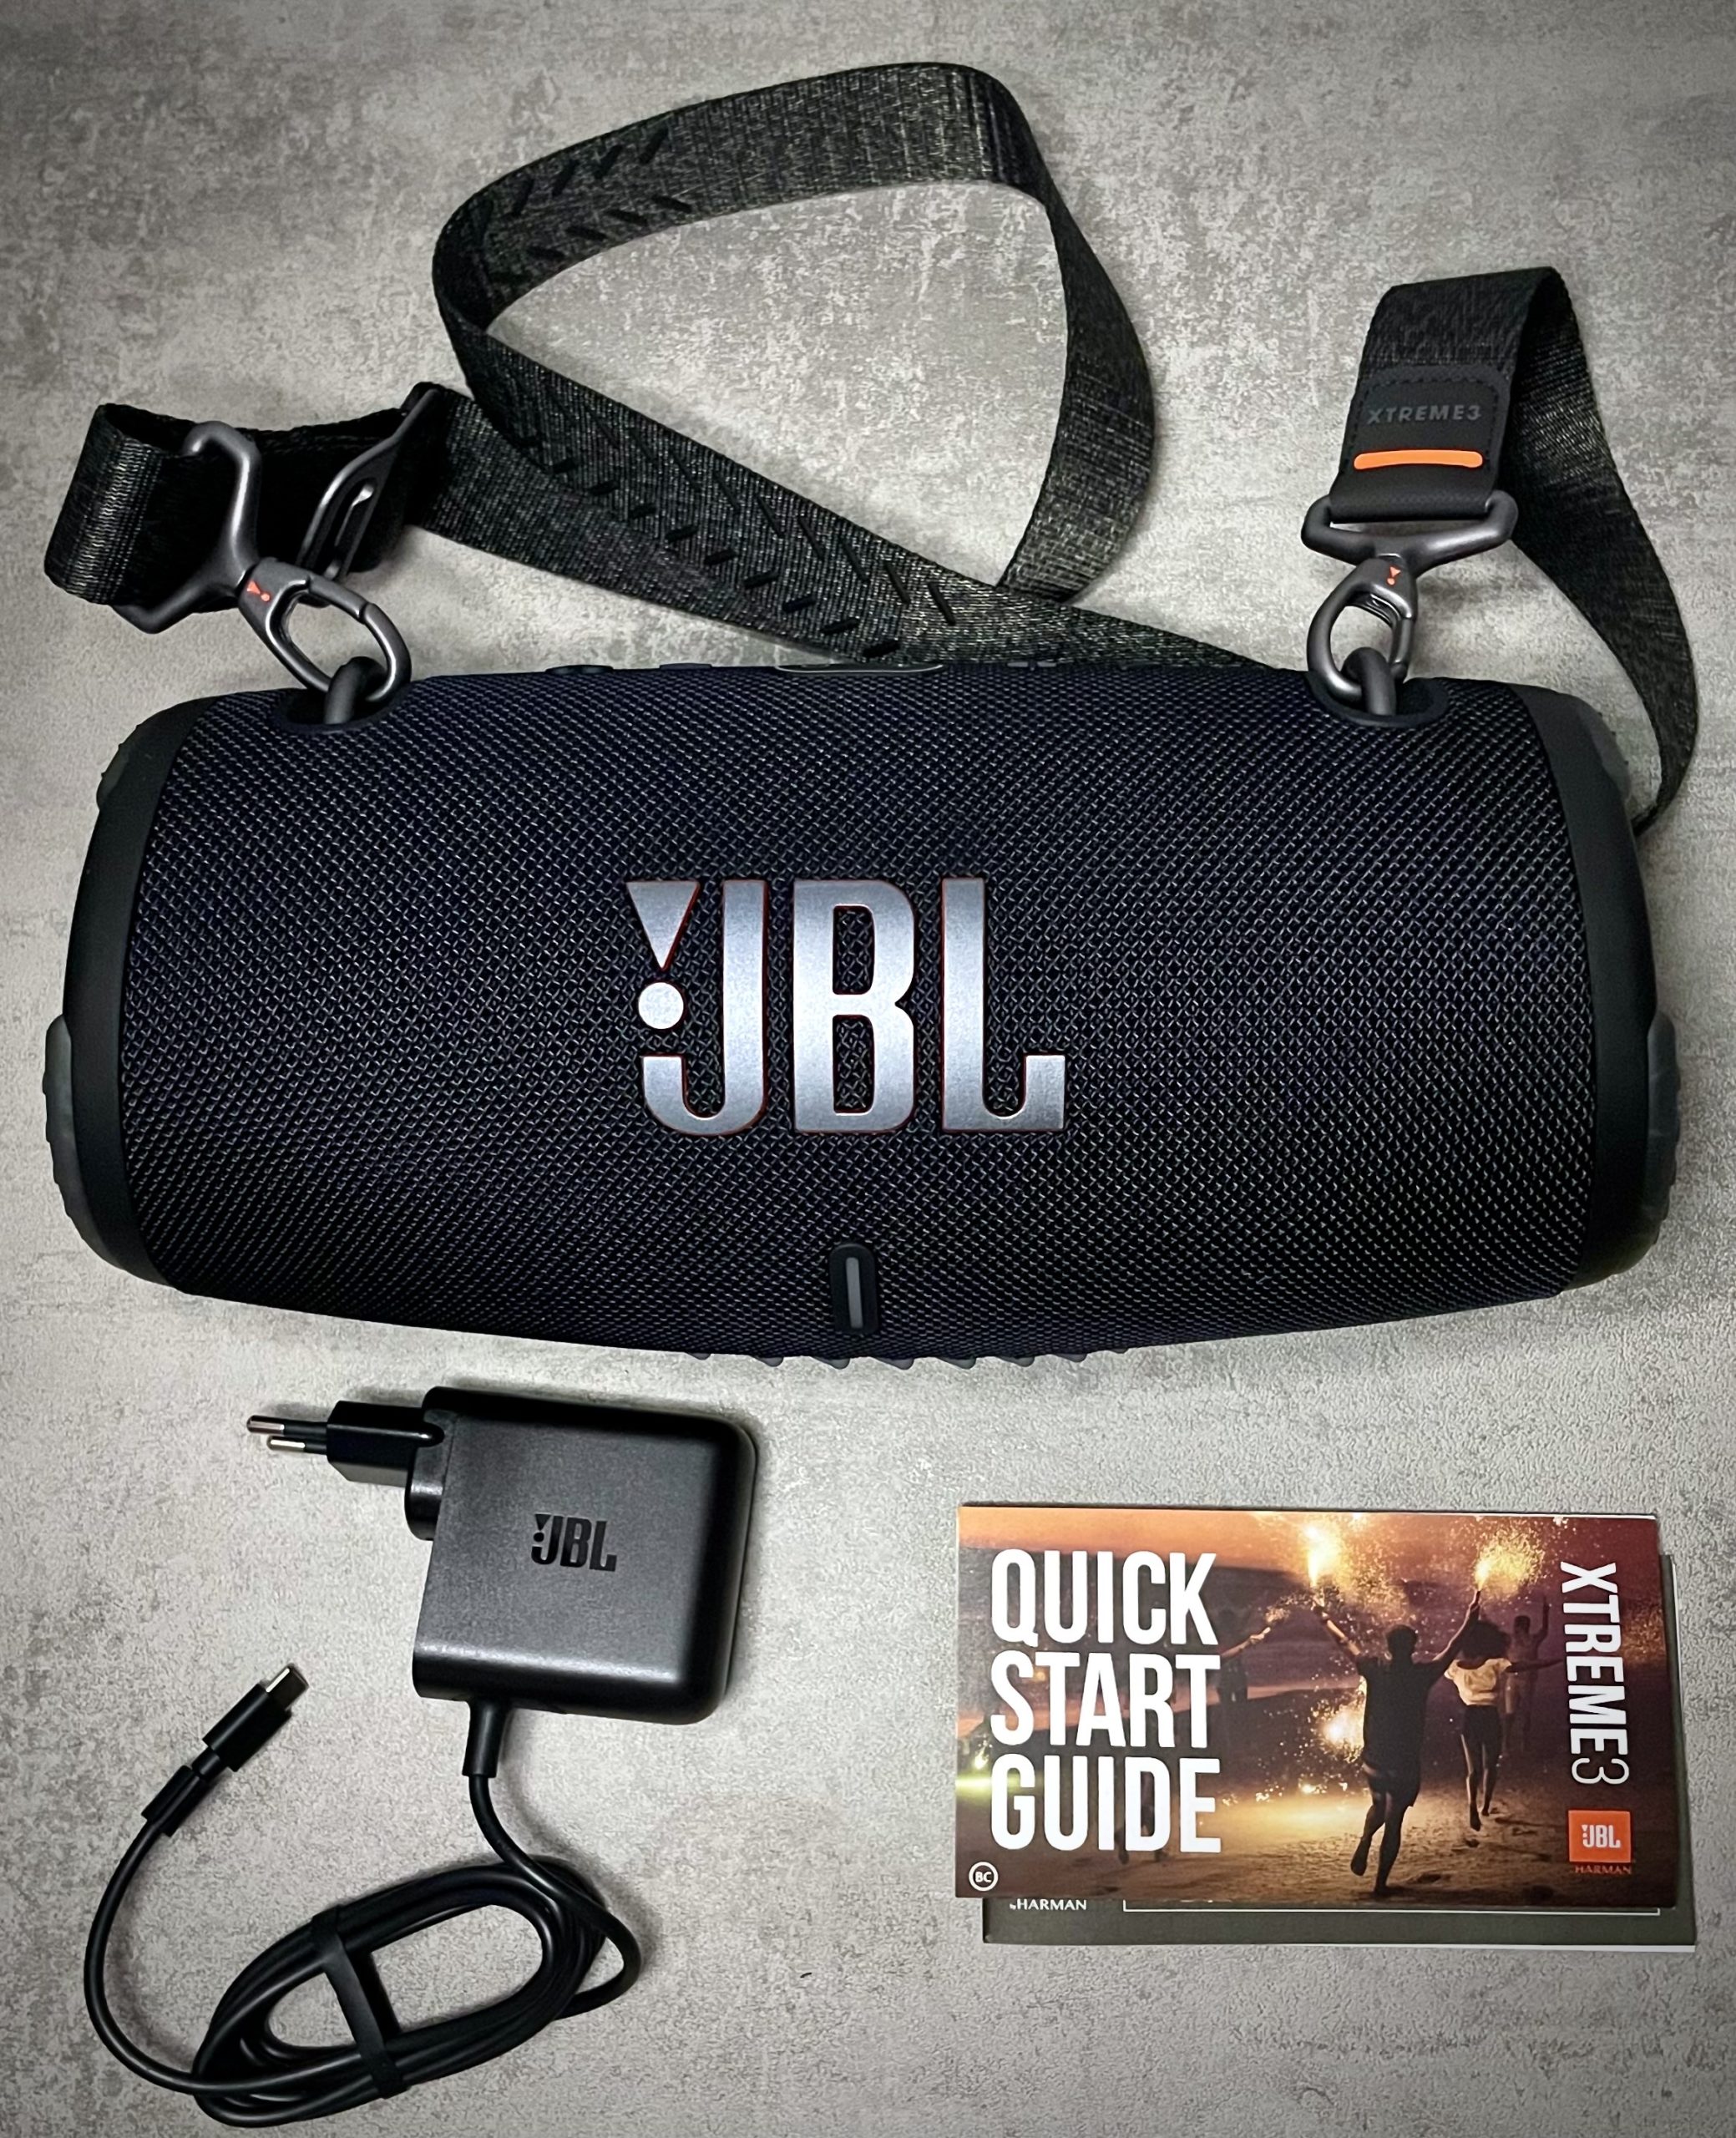 JBL Xtreme 3 in review: The portable bass monster with style